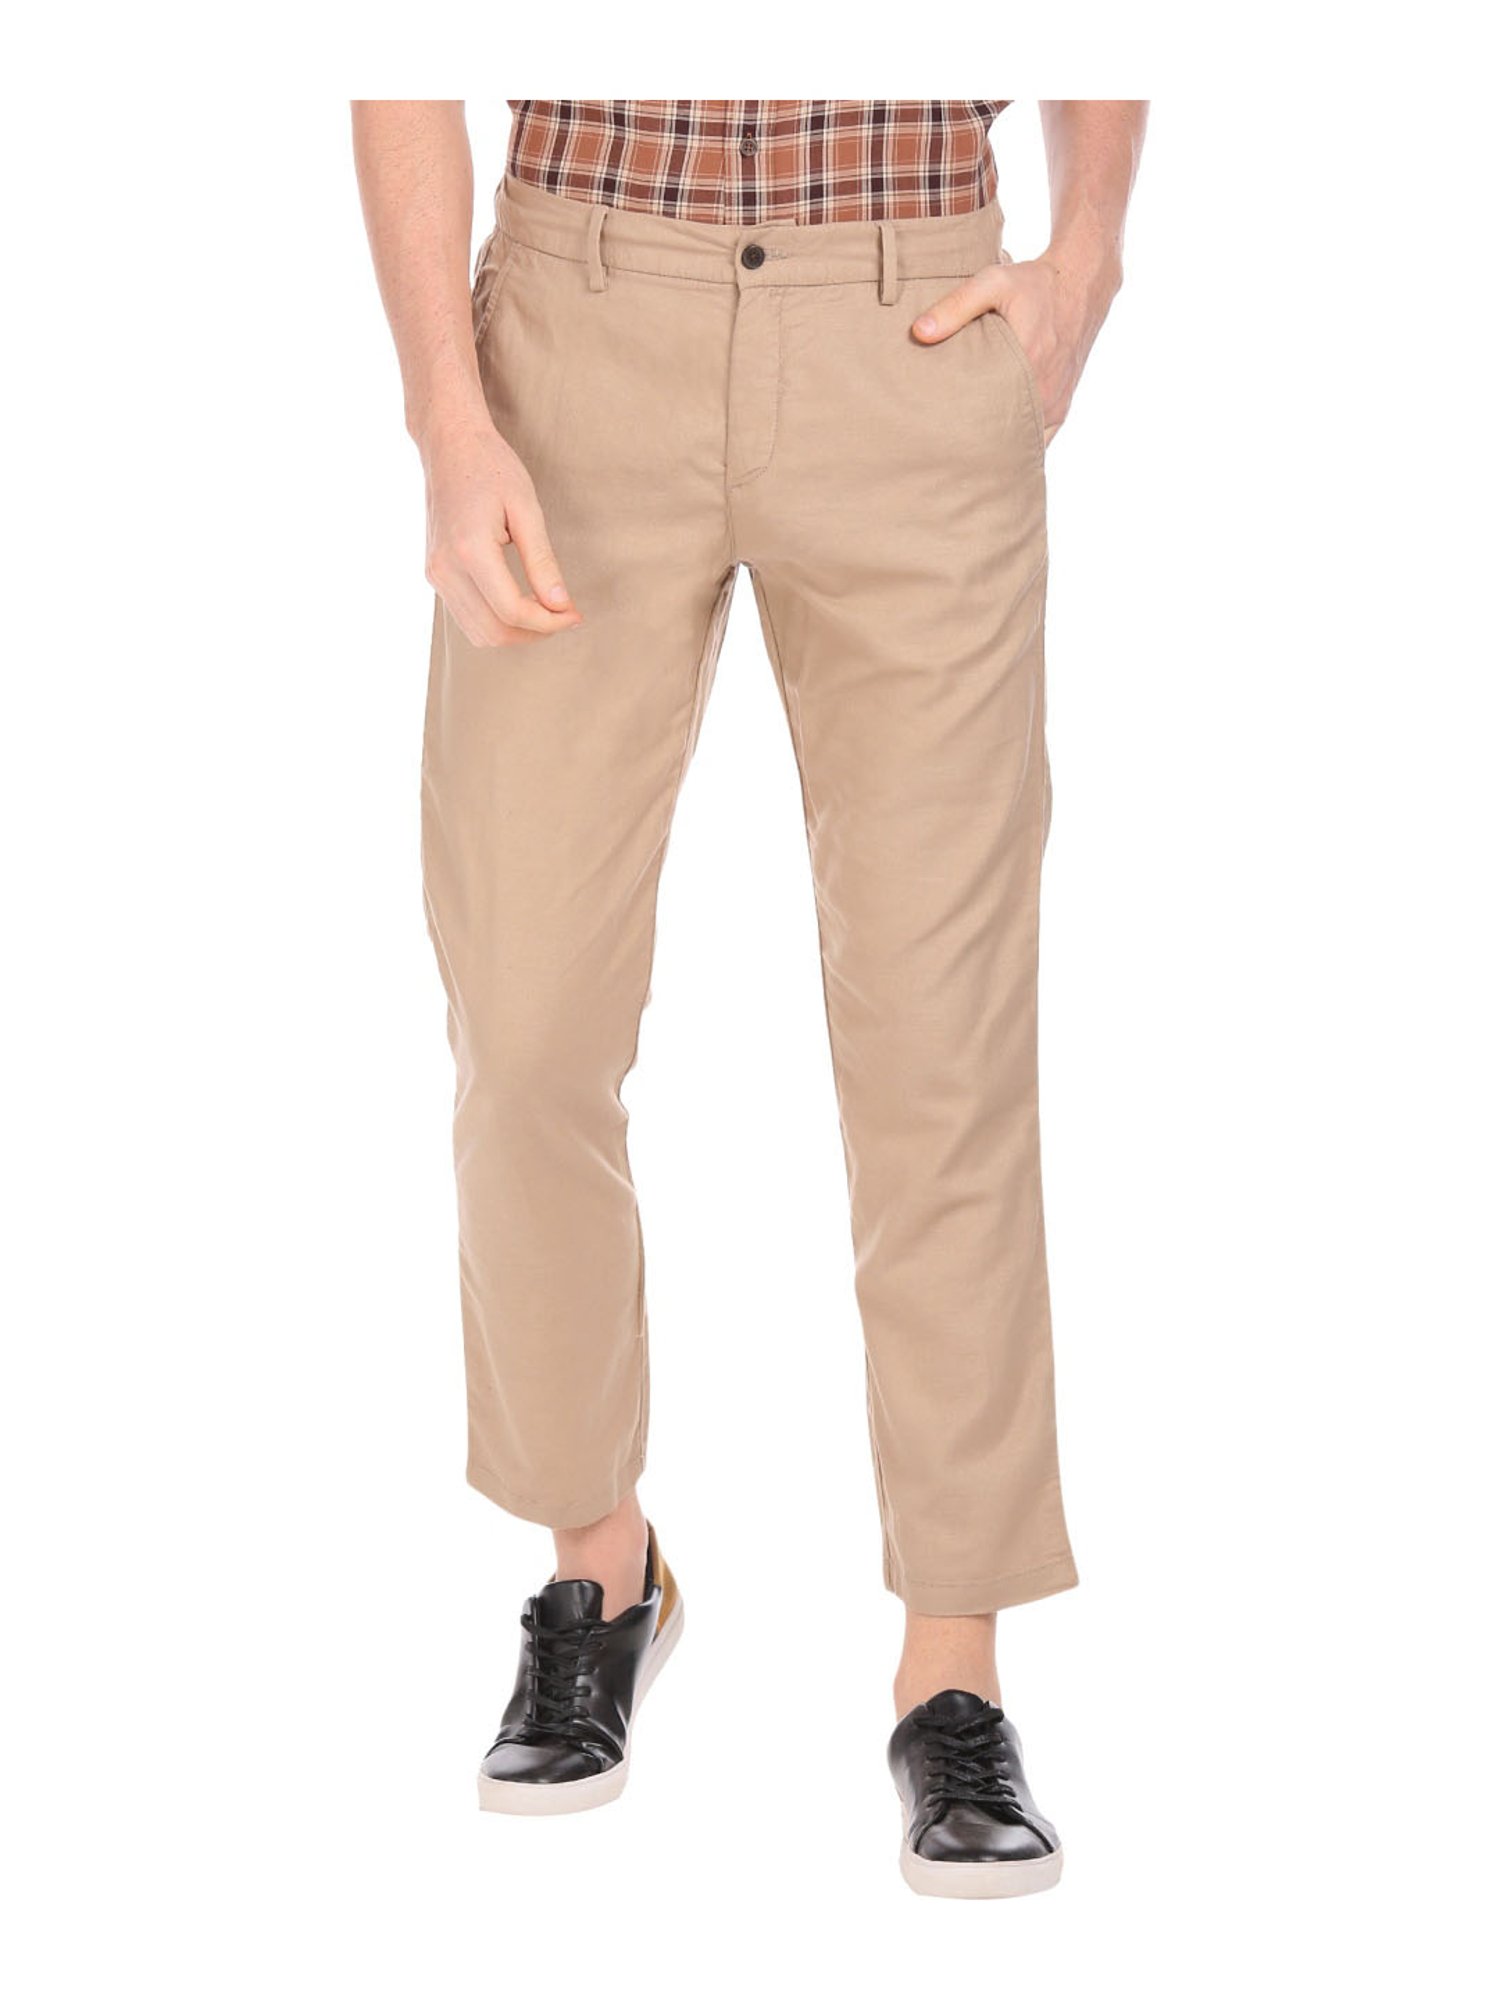 Arrow Trousers Specialities  Comfort at Best Price in Alirajpur   Siddhivinayak Fashion